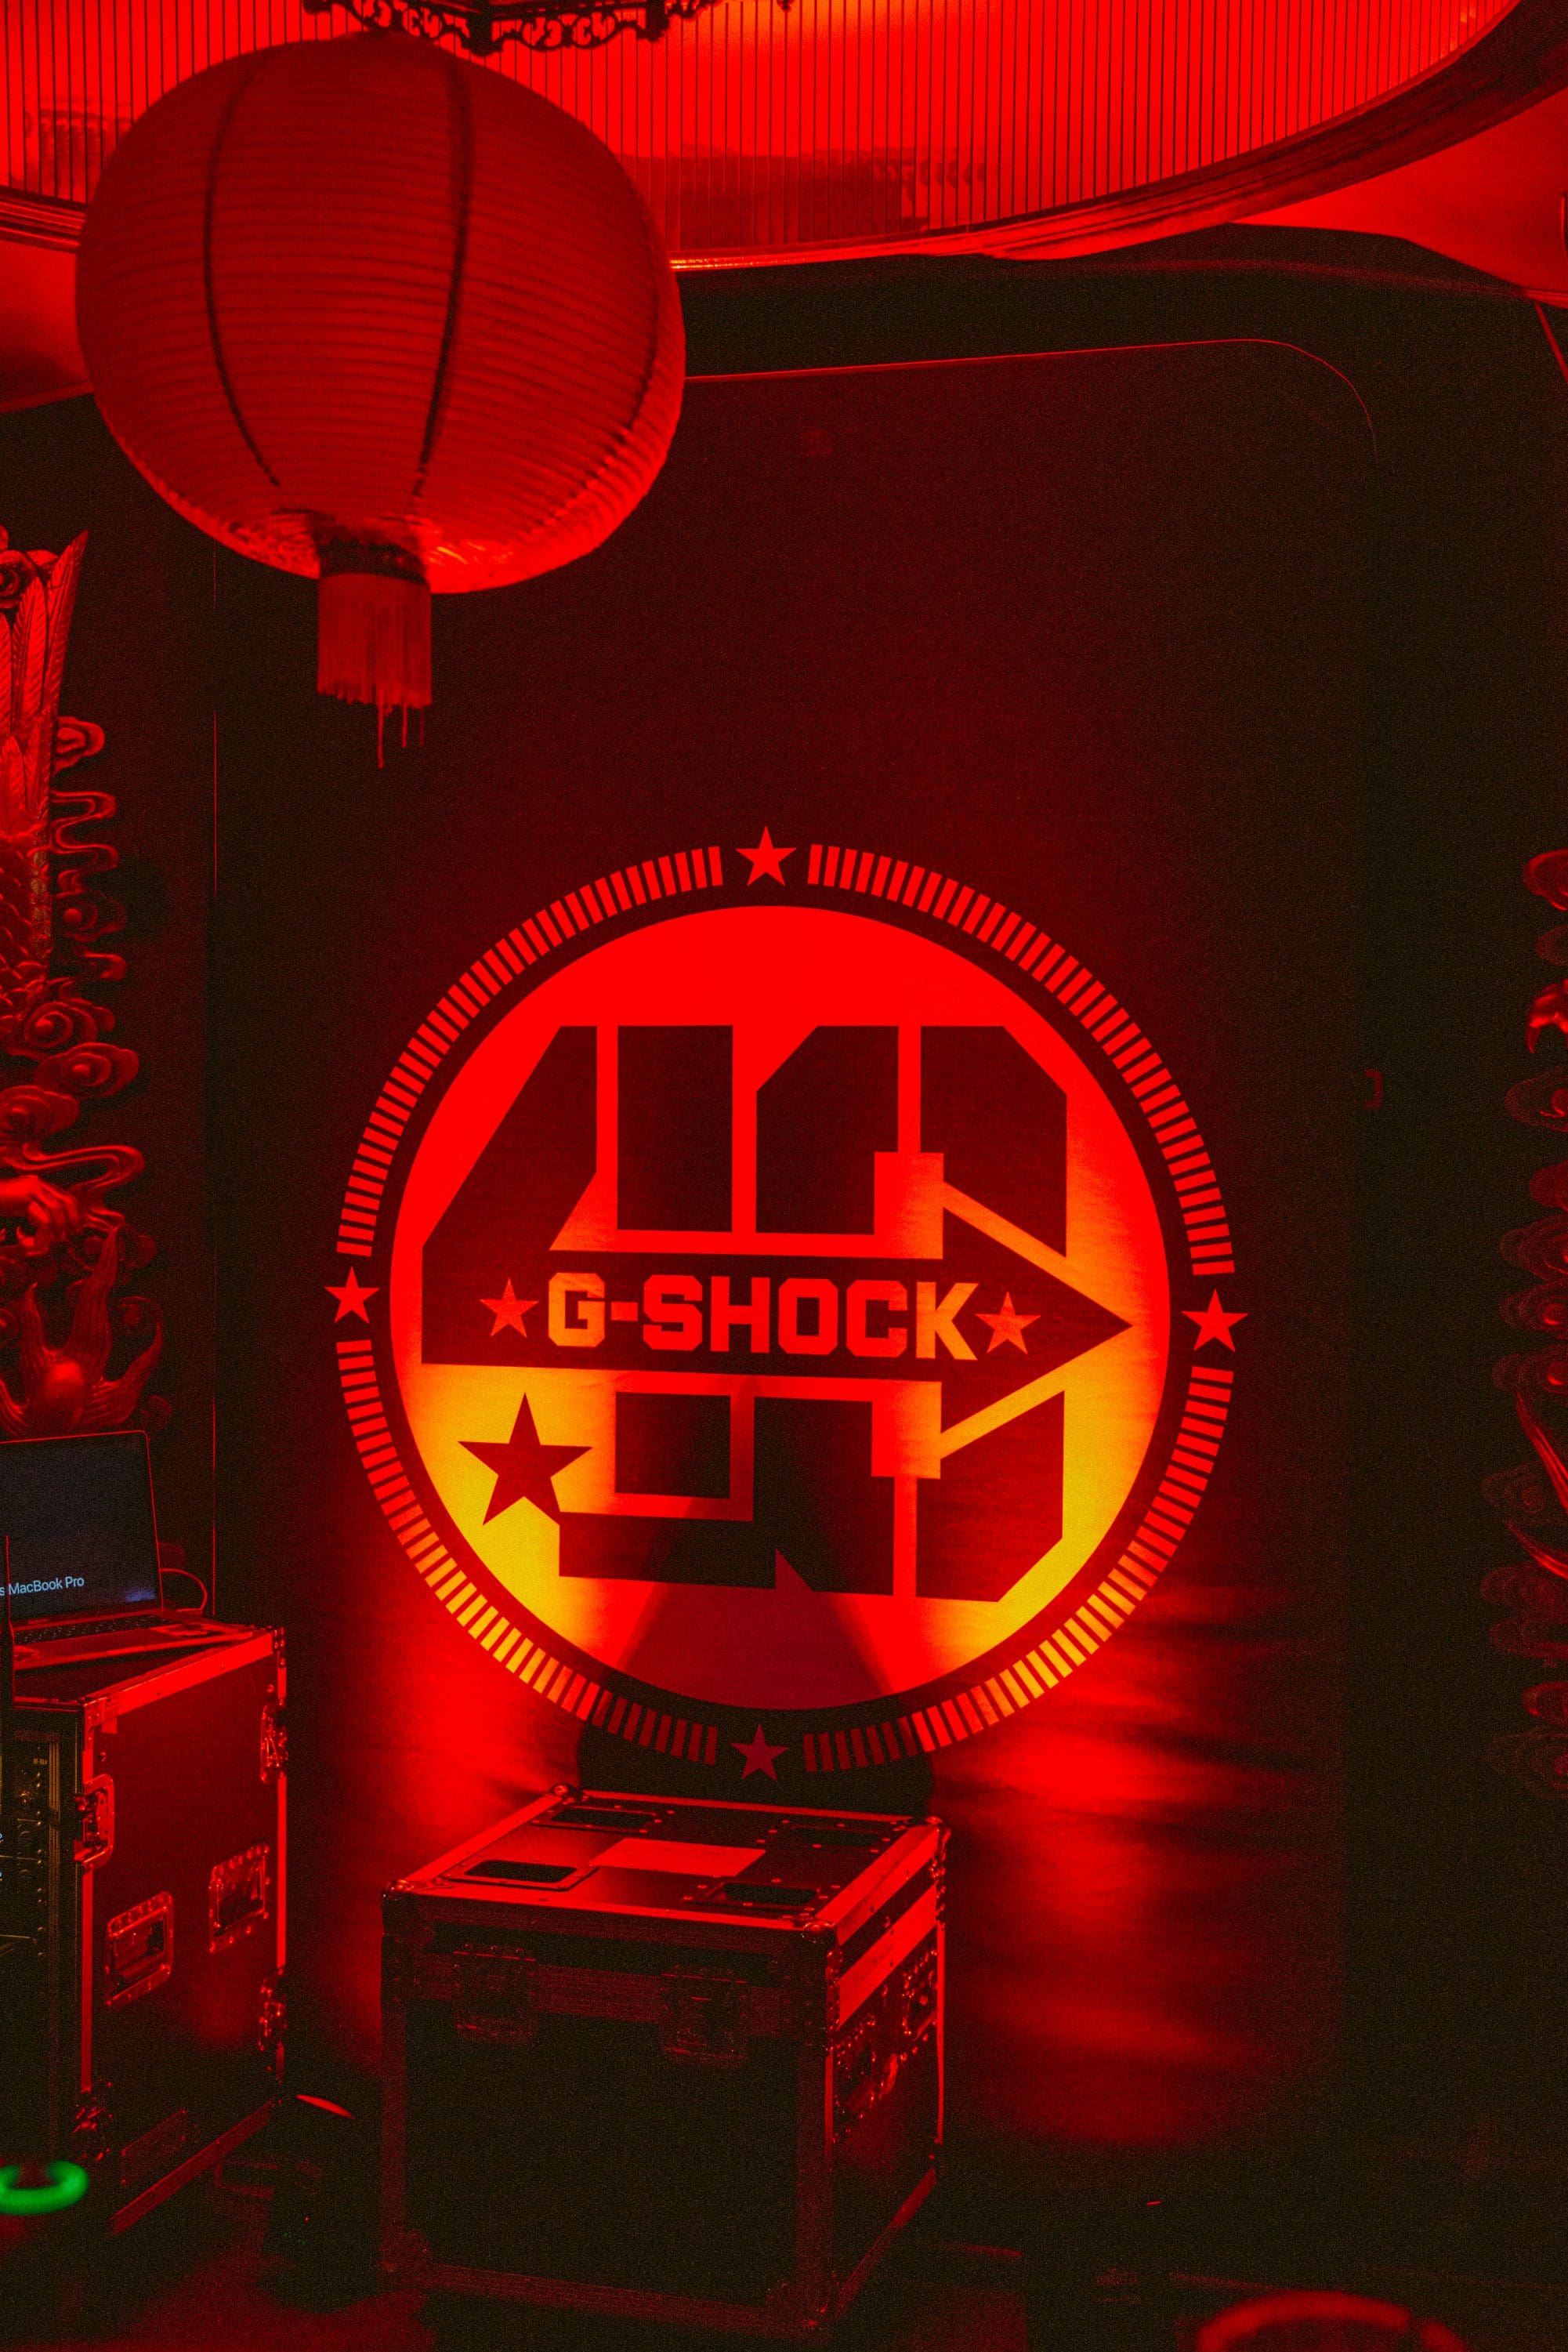 Wall decorate in the G-SHOCK 40th anniversary logo light in a soft red light